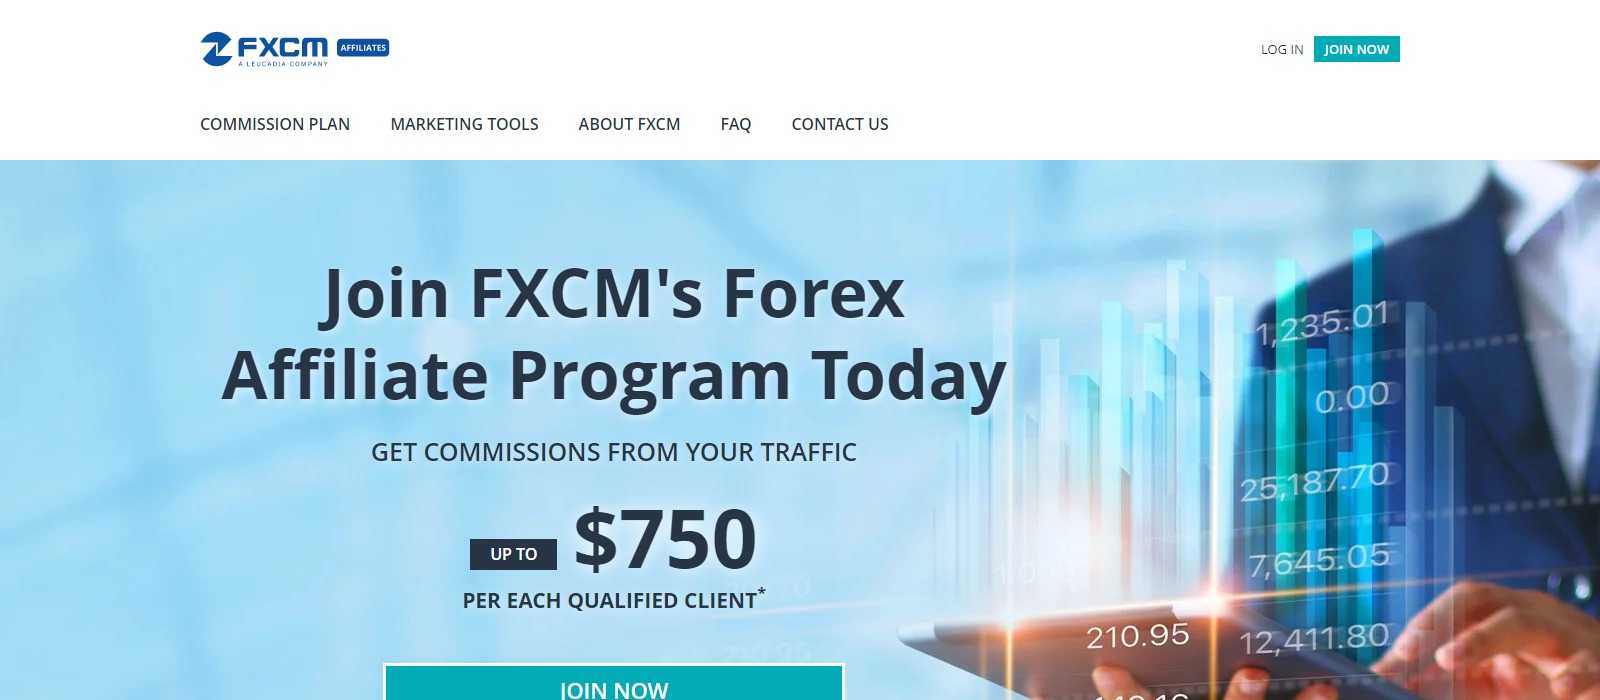 FXCM Affiliate Program Review: Get Earn Up to $750 per each qualified client